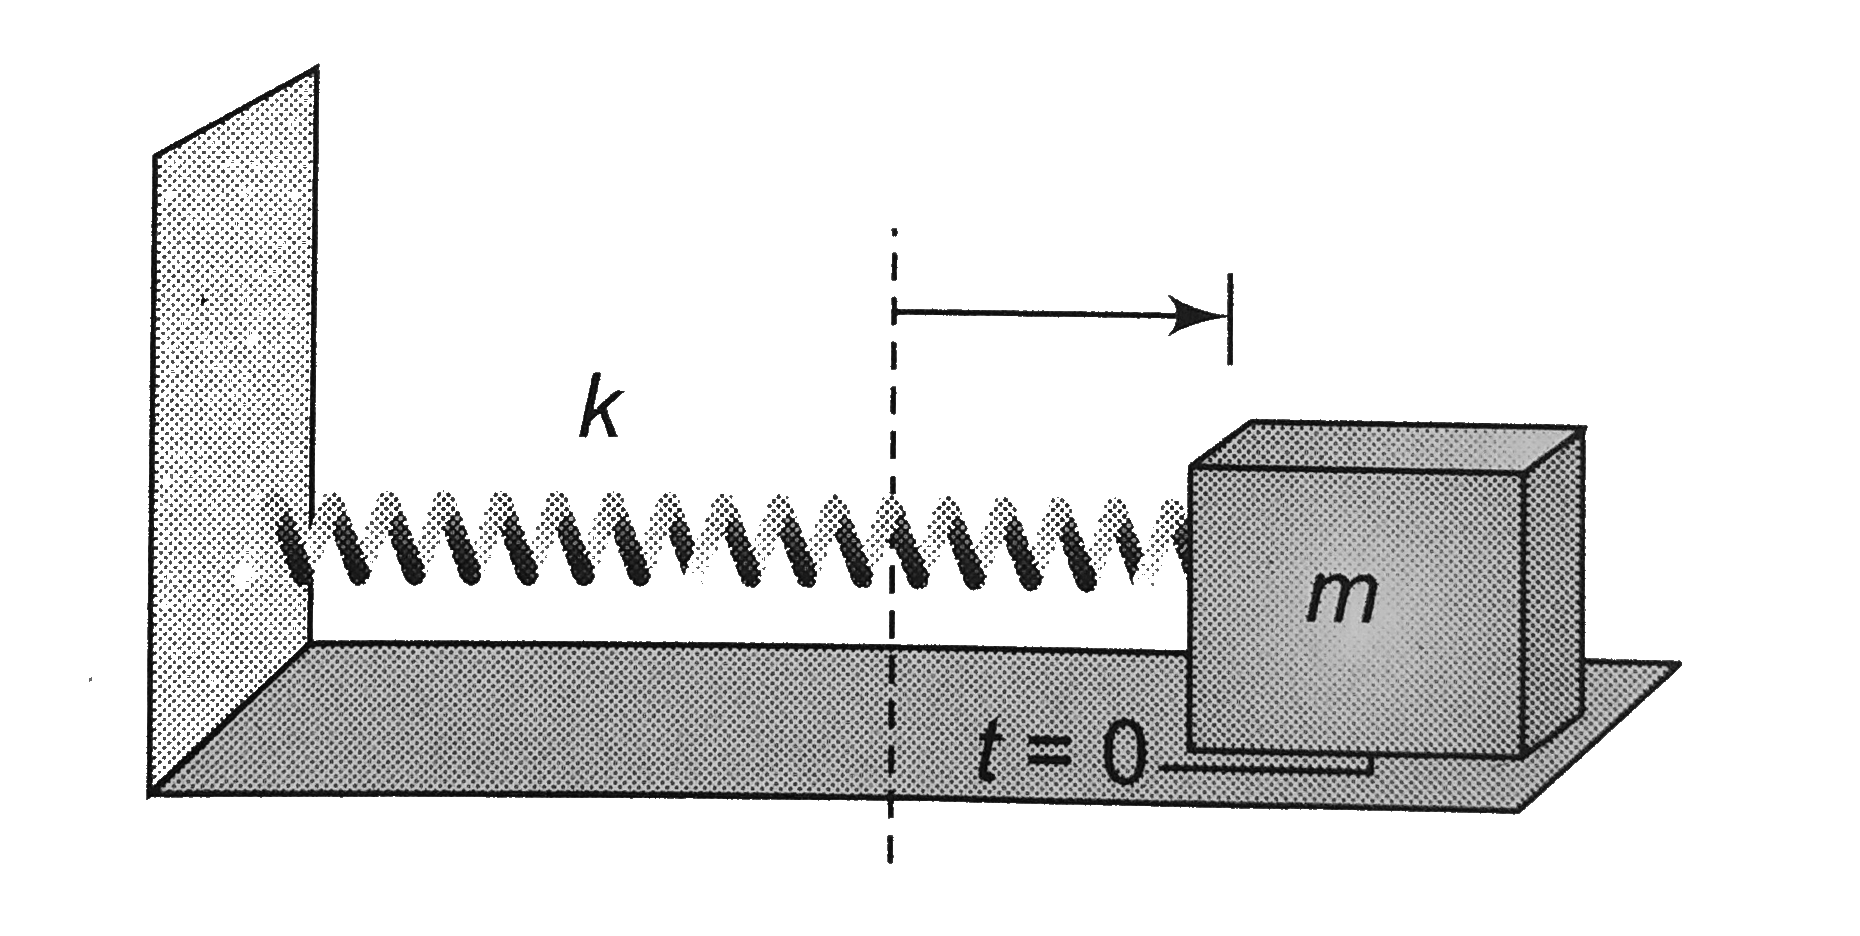 In a horizontal spring - mass system mass m is released after  being displaced towards right by some distance t = 0 on a friction-less surface. The phase angle of motion in radian when it is first time passing through equilibrium position is equal to